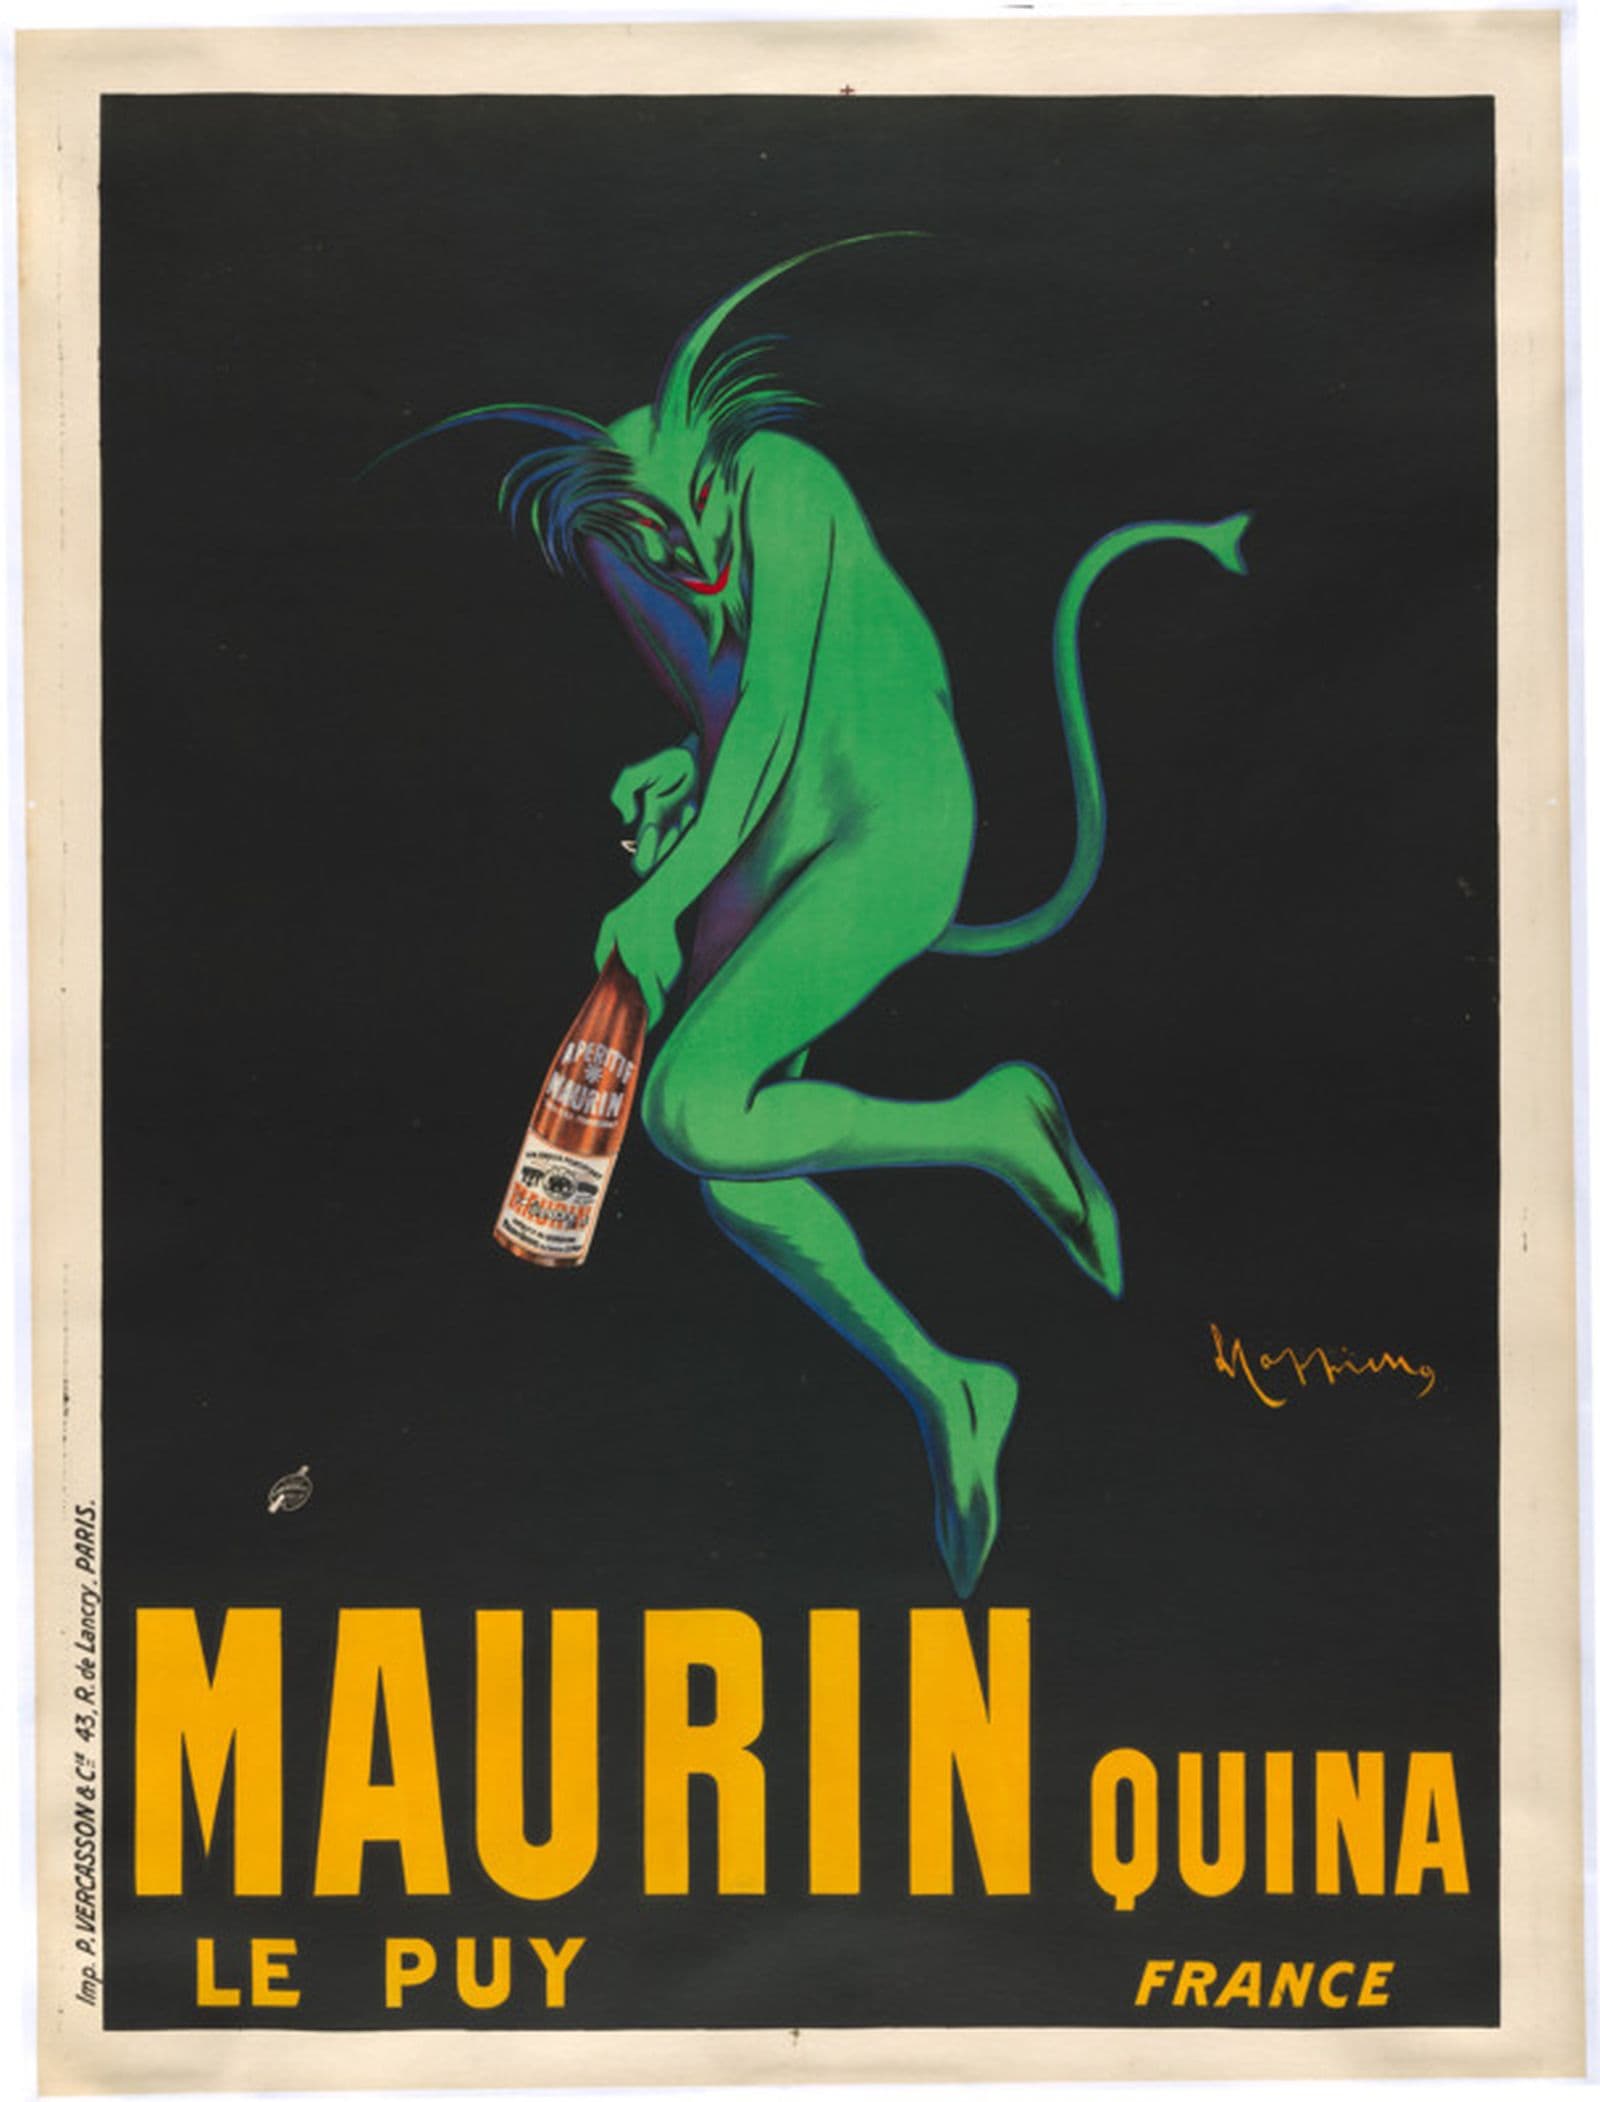 Print of a green goblin holding a bottle of alcohol upon a black background. Yellow text underneath reads Maurin Quina